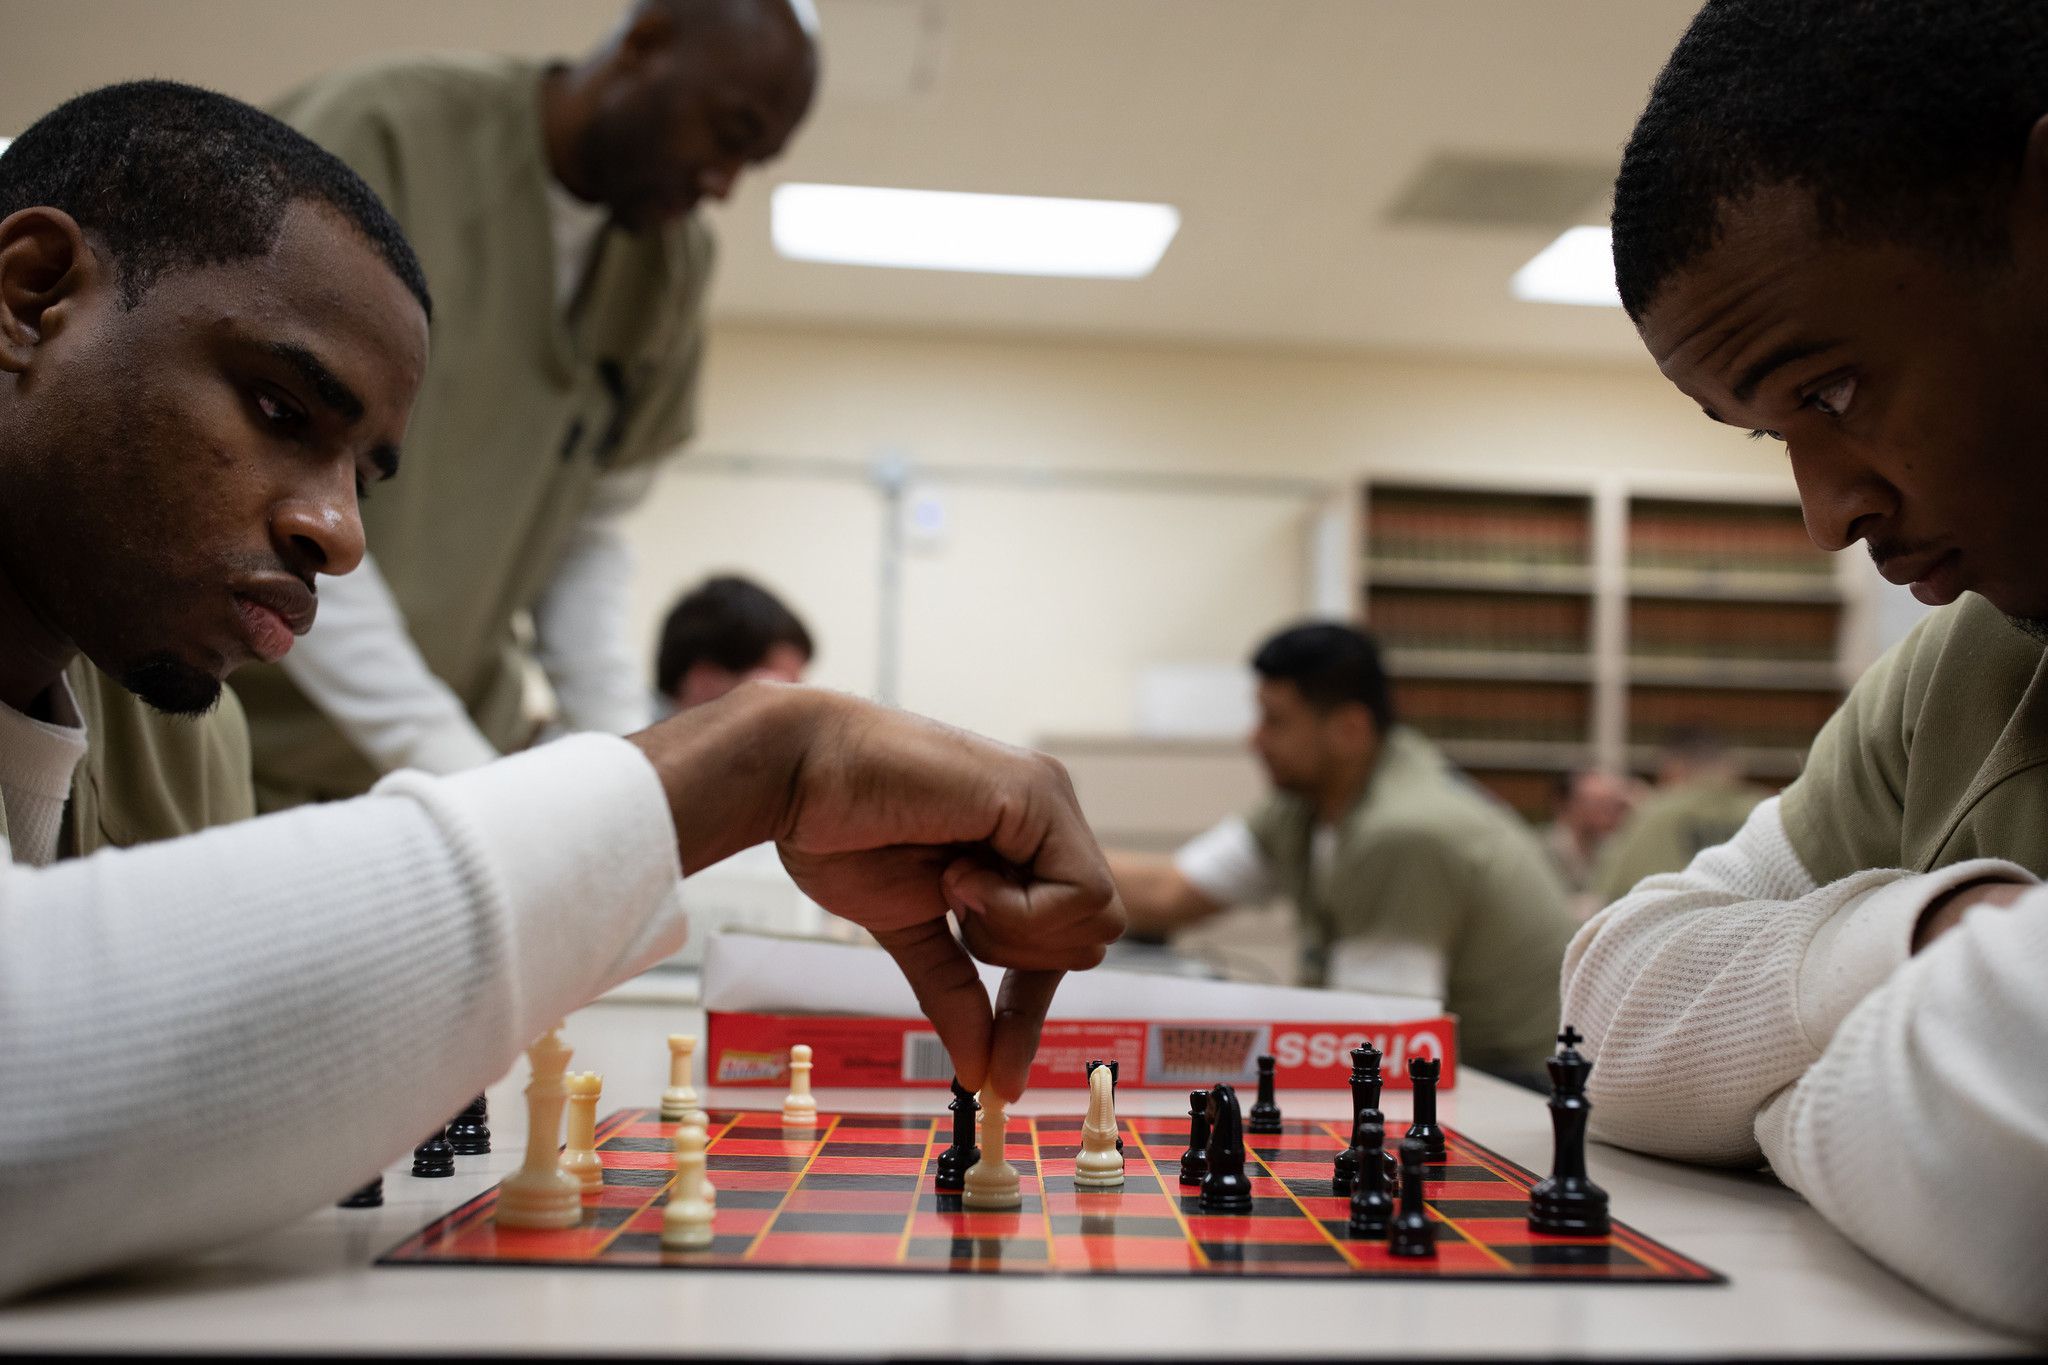 From inside Cook County Jail, chess spreads across the globe - Chicago  Sun-Times